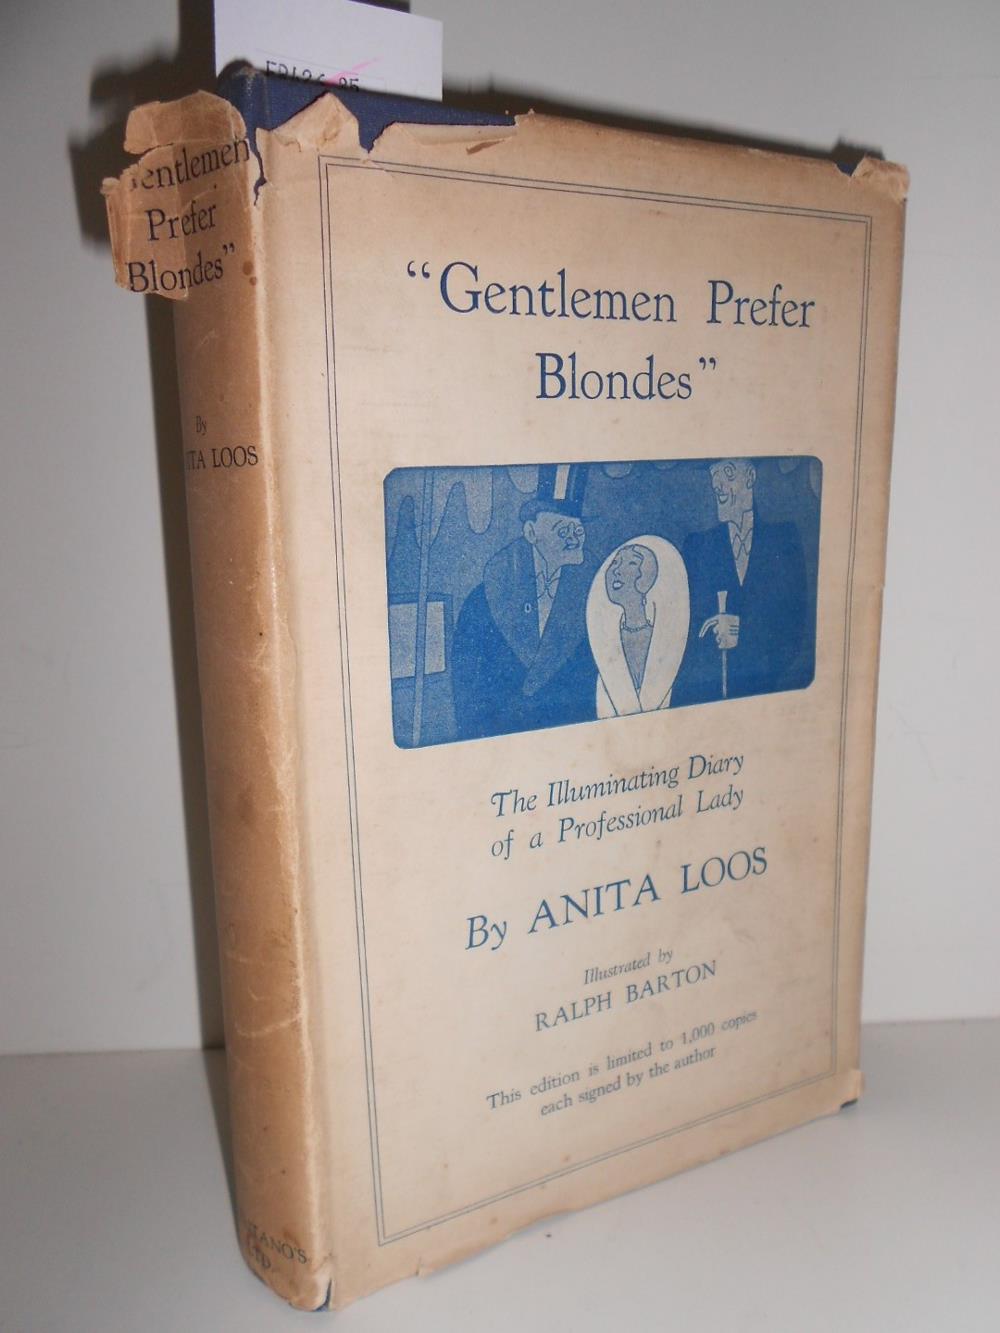 LOOS (Anita) "Gentlemen Prefer Blondes". The Illuminating Diary of a Professional Lady, limited to - Image 2 of 5